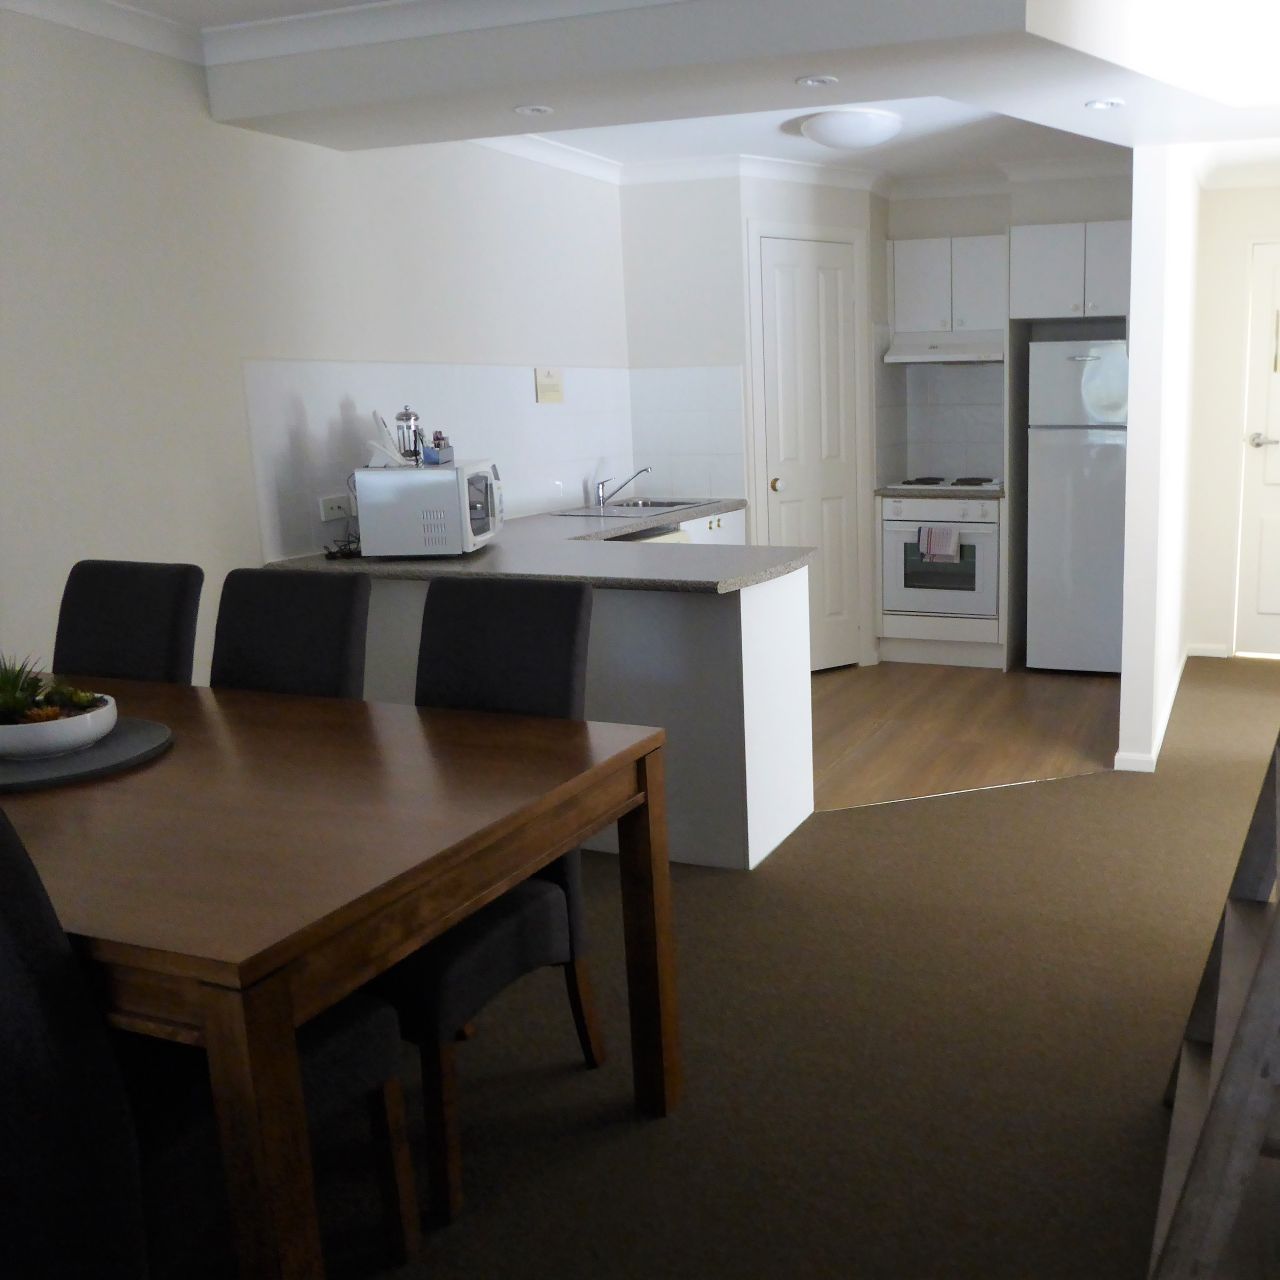 Hotel Lifestyle Apartments at Ferntree - 4 HRS star hotel in Fern Tree Gully  (State of Victoria)